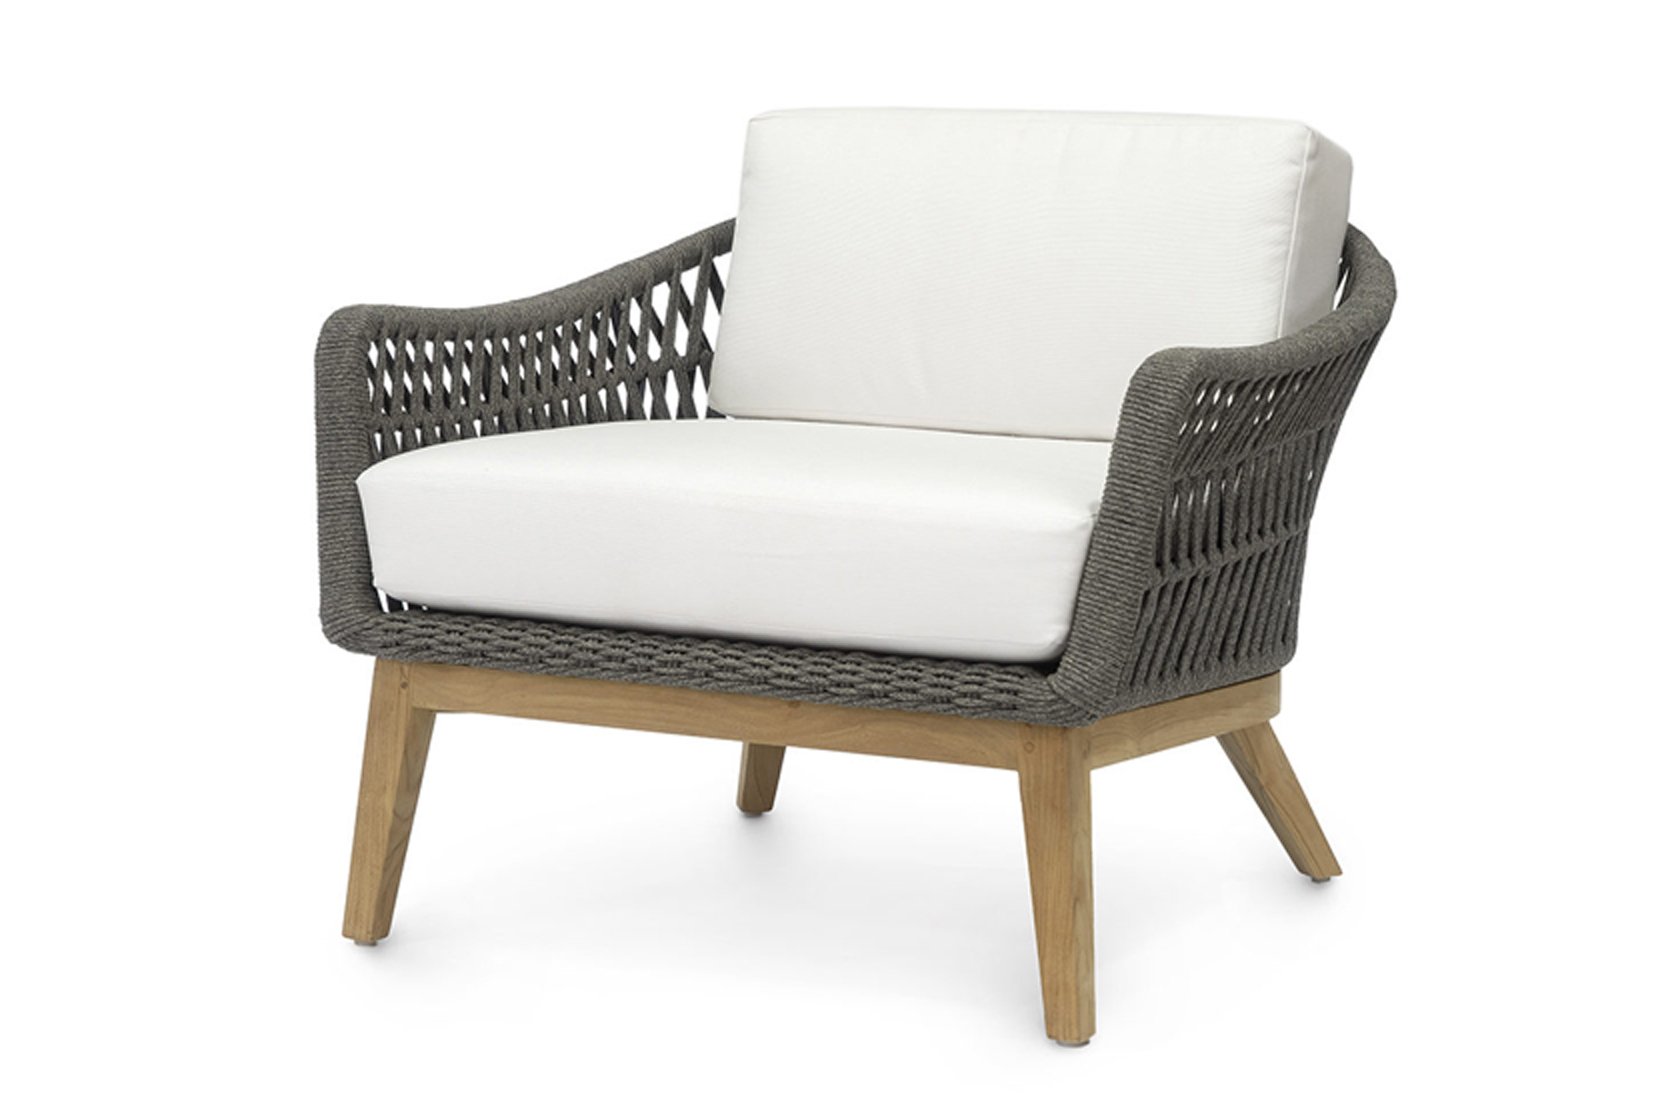 Sorrento Outdoor Lounge Chair